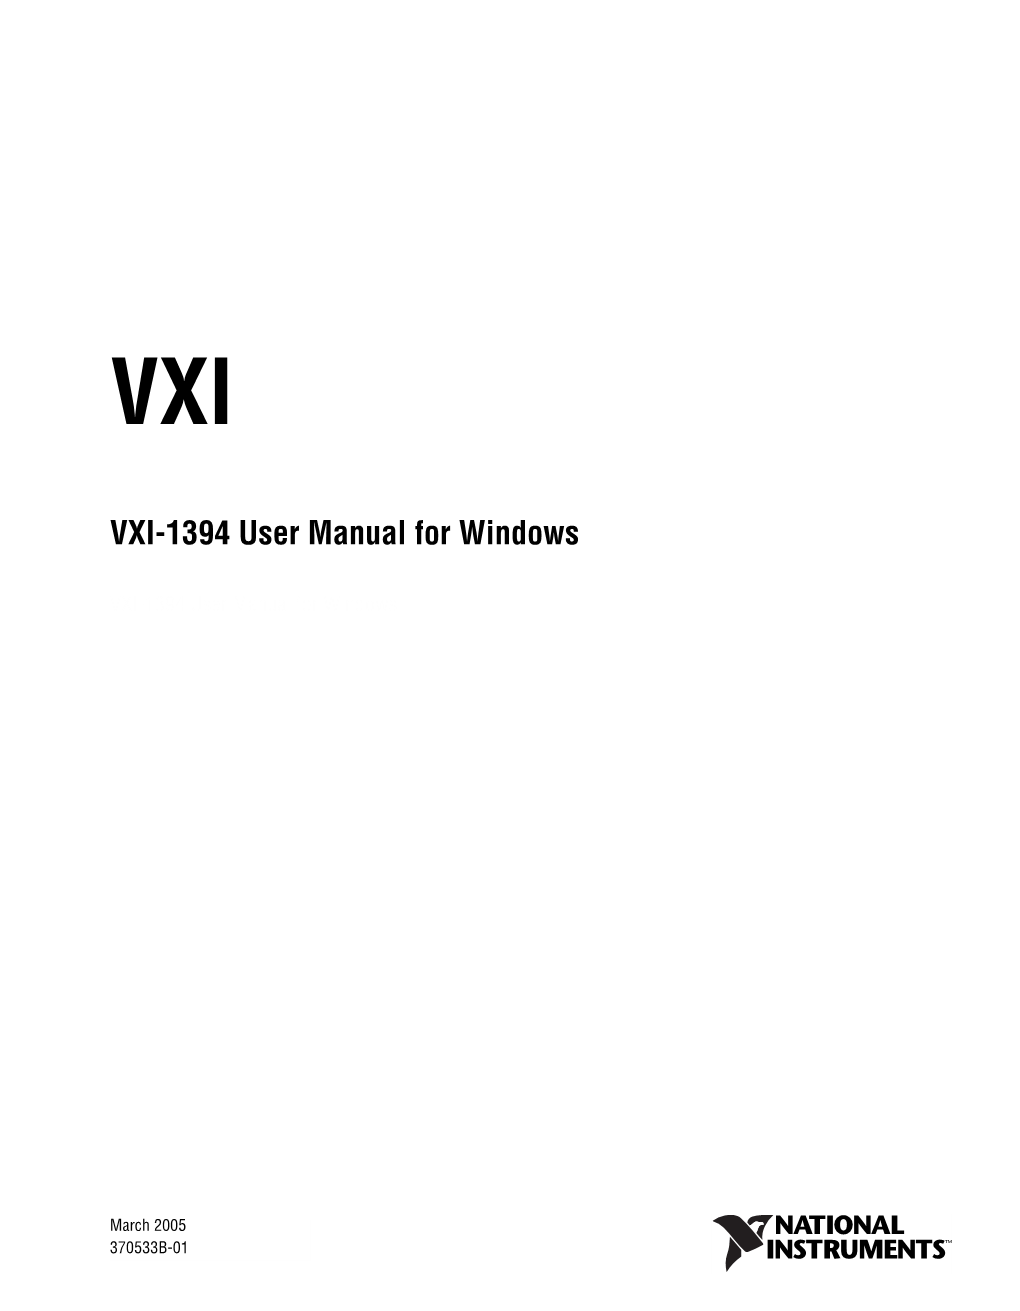 VXI-1394 User Manual and Specifications for Windows